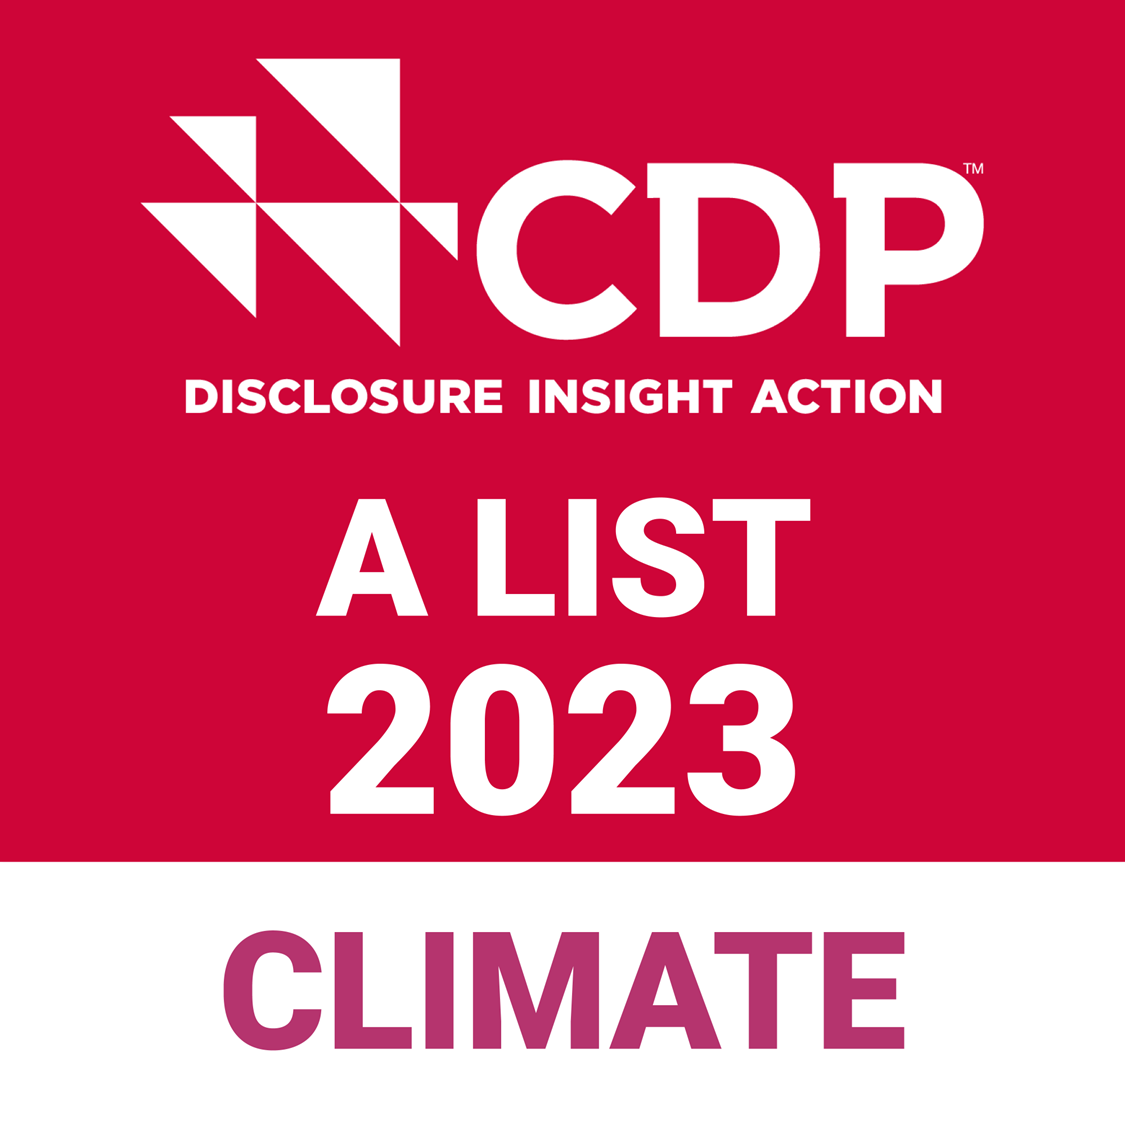 CDP DISCLOSURE INSIGHT ACTION A LIST 2023 CLIMATE